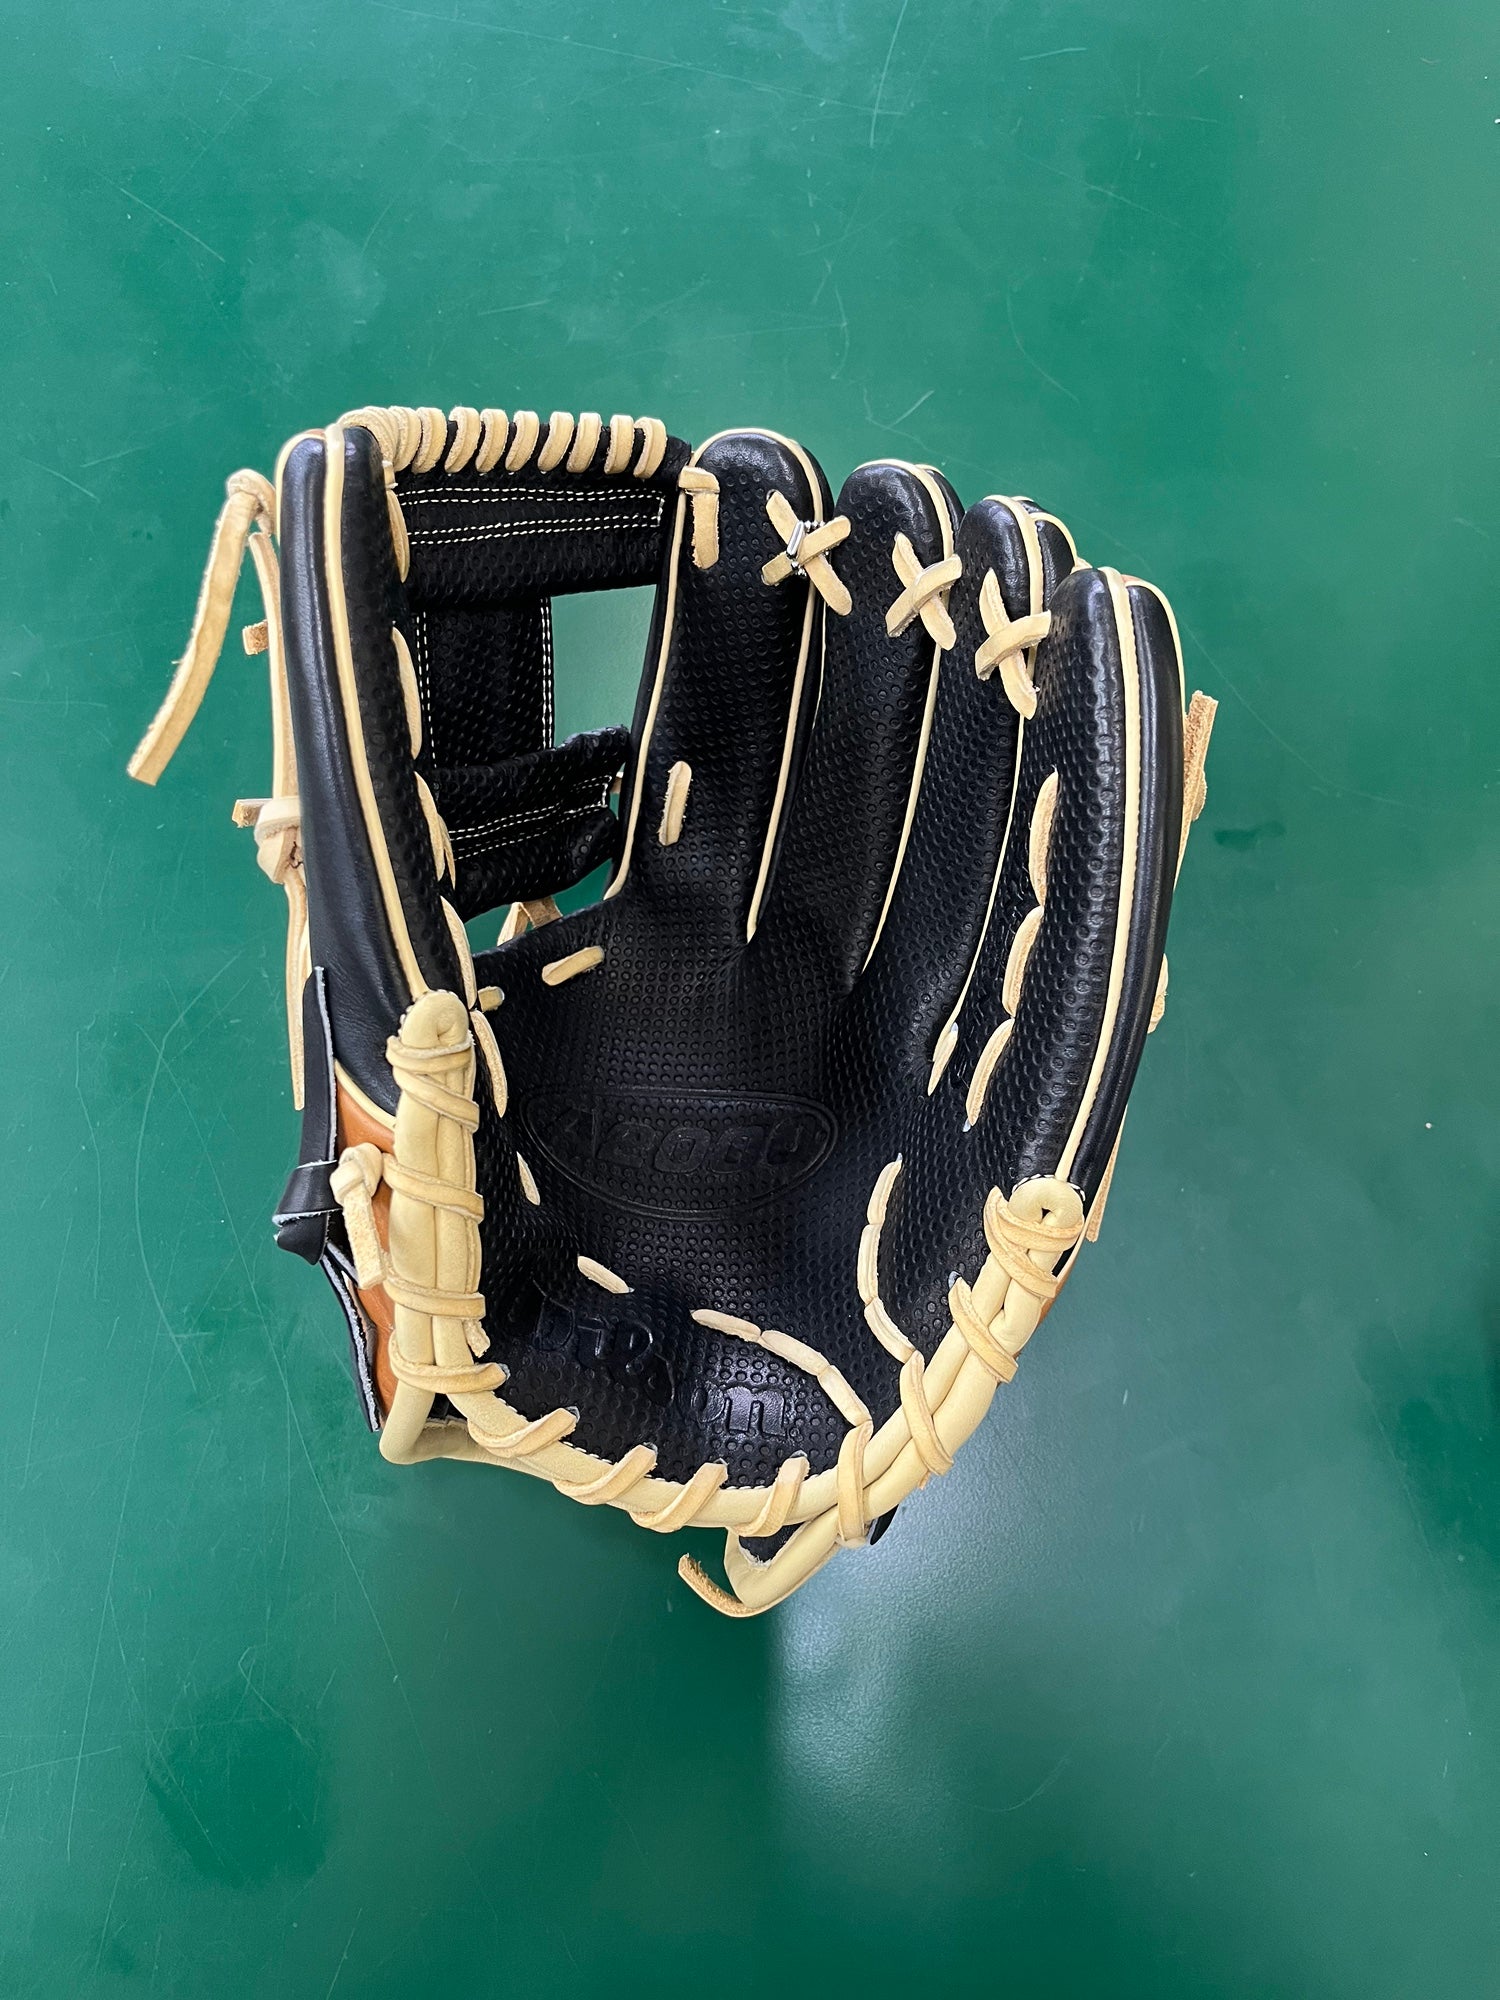 Wilson Baseball & Softball on X: Customized for @KeBryanHayes. Check out Ke 'Bryan's latest A2000 KBH13 Game Model glove design, and see why he trusts  his A2000 at third base. KE'BRYAN'S A2000